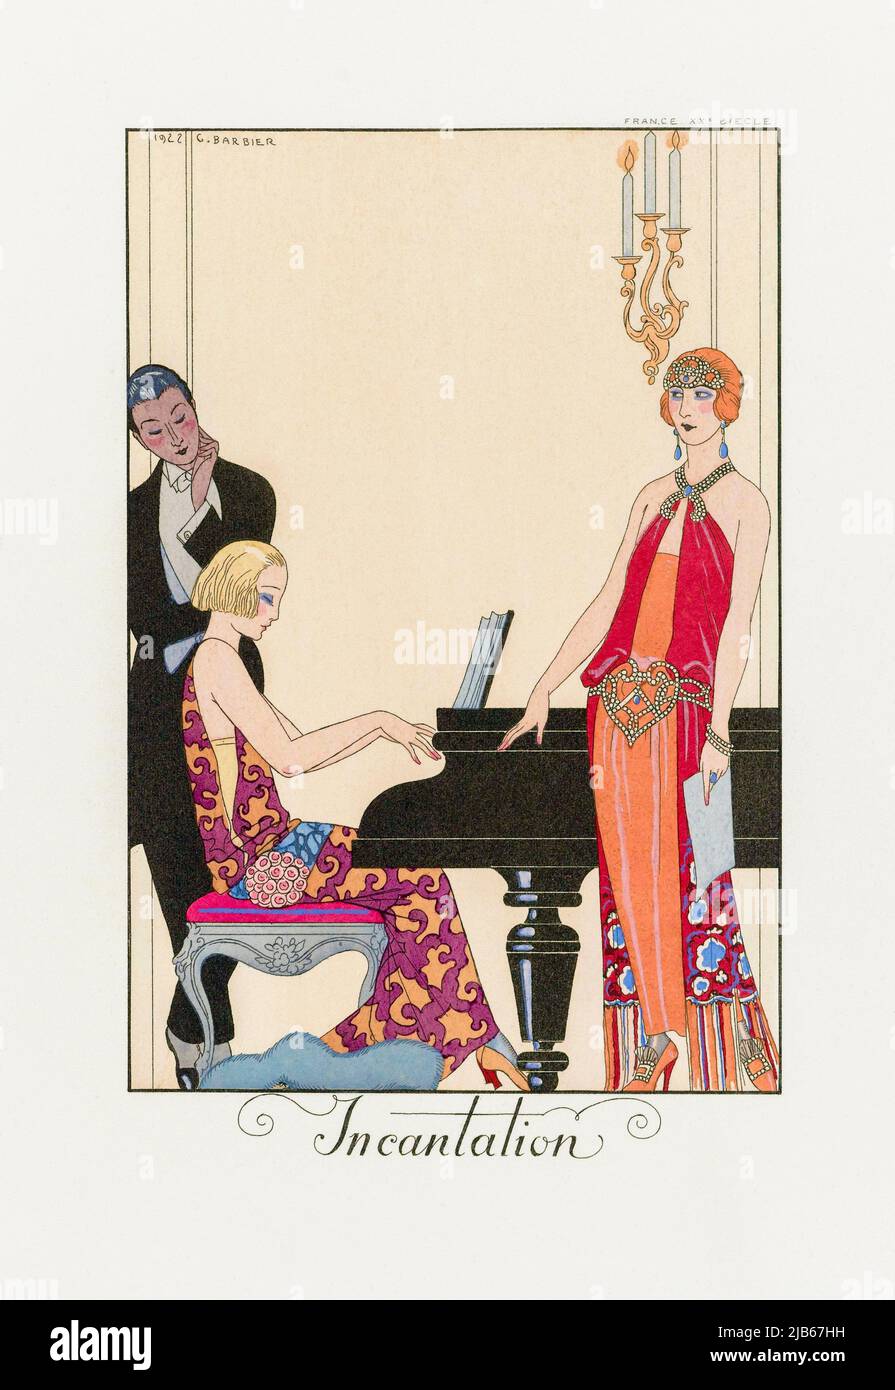 Incantation. From George Barbier's almanac Falbalas et Fanfreluches 1922 - 1926. After a work by French illustrator George Barbier, 1882 - 1932. Stock Photo